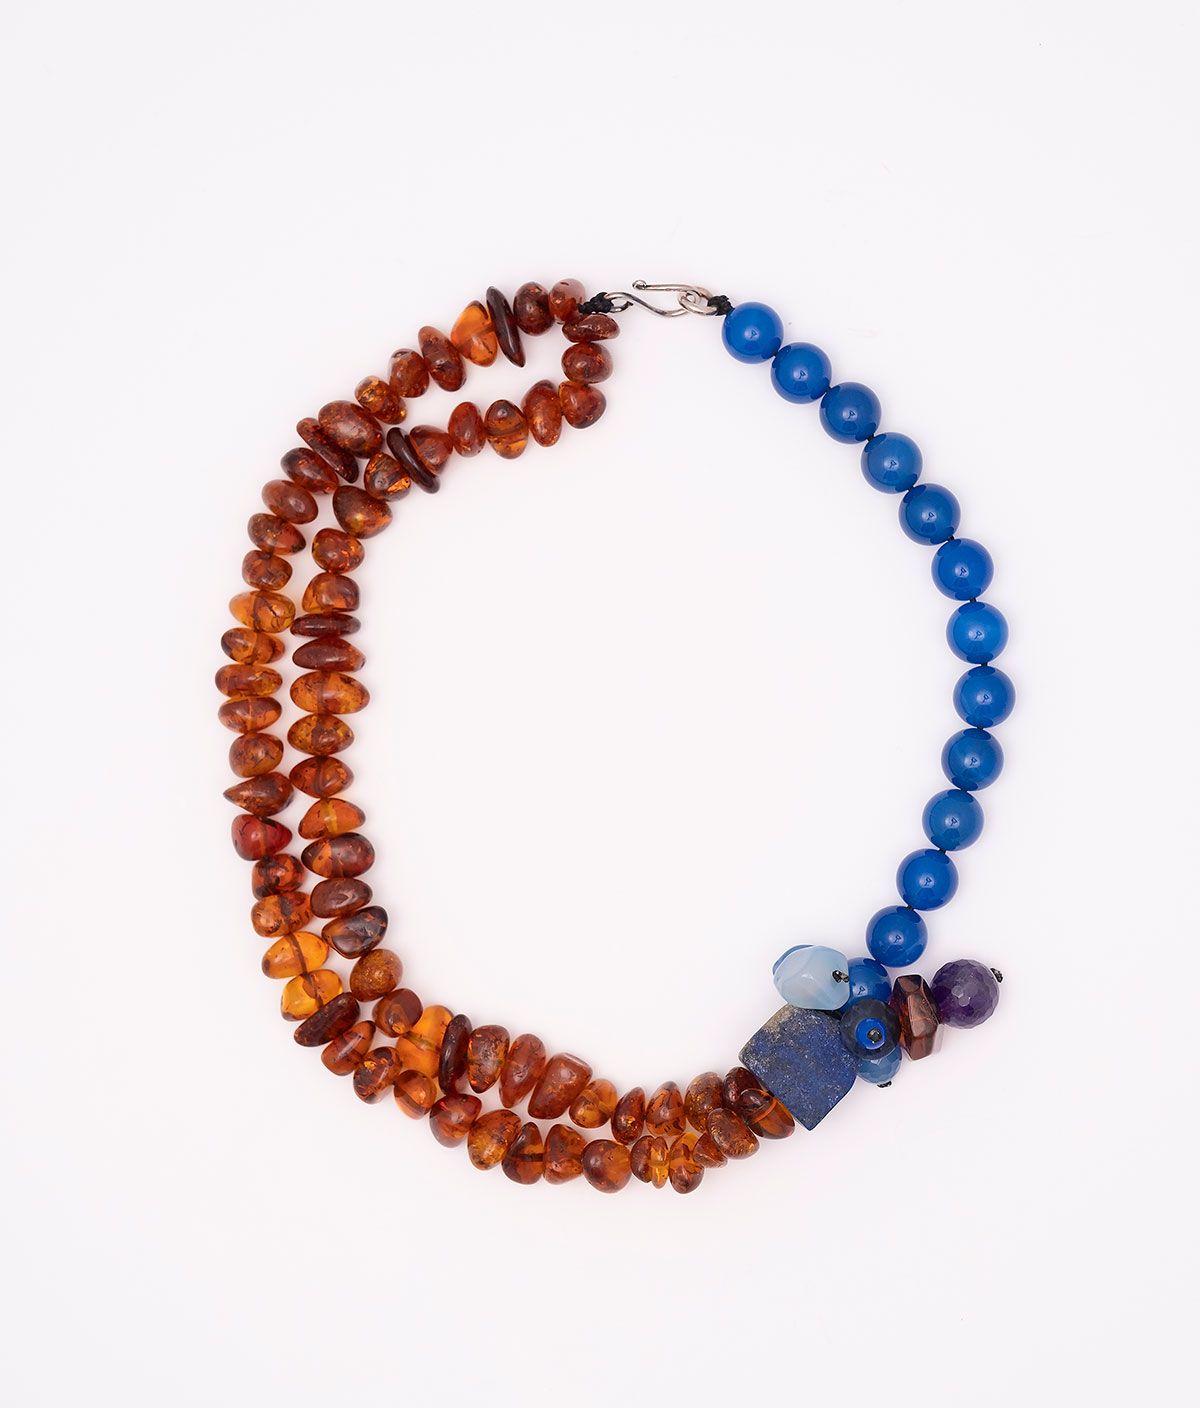 Necklace made of genuine amber from Baltic sea - cut by hand and semiprecious stones.